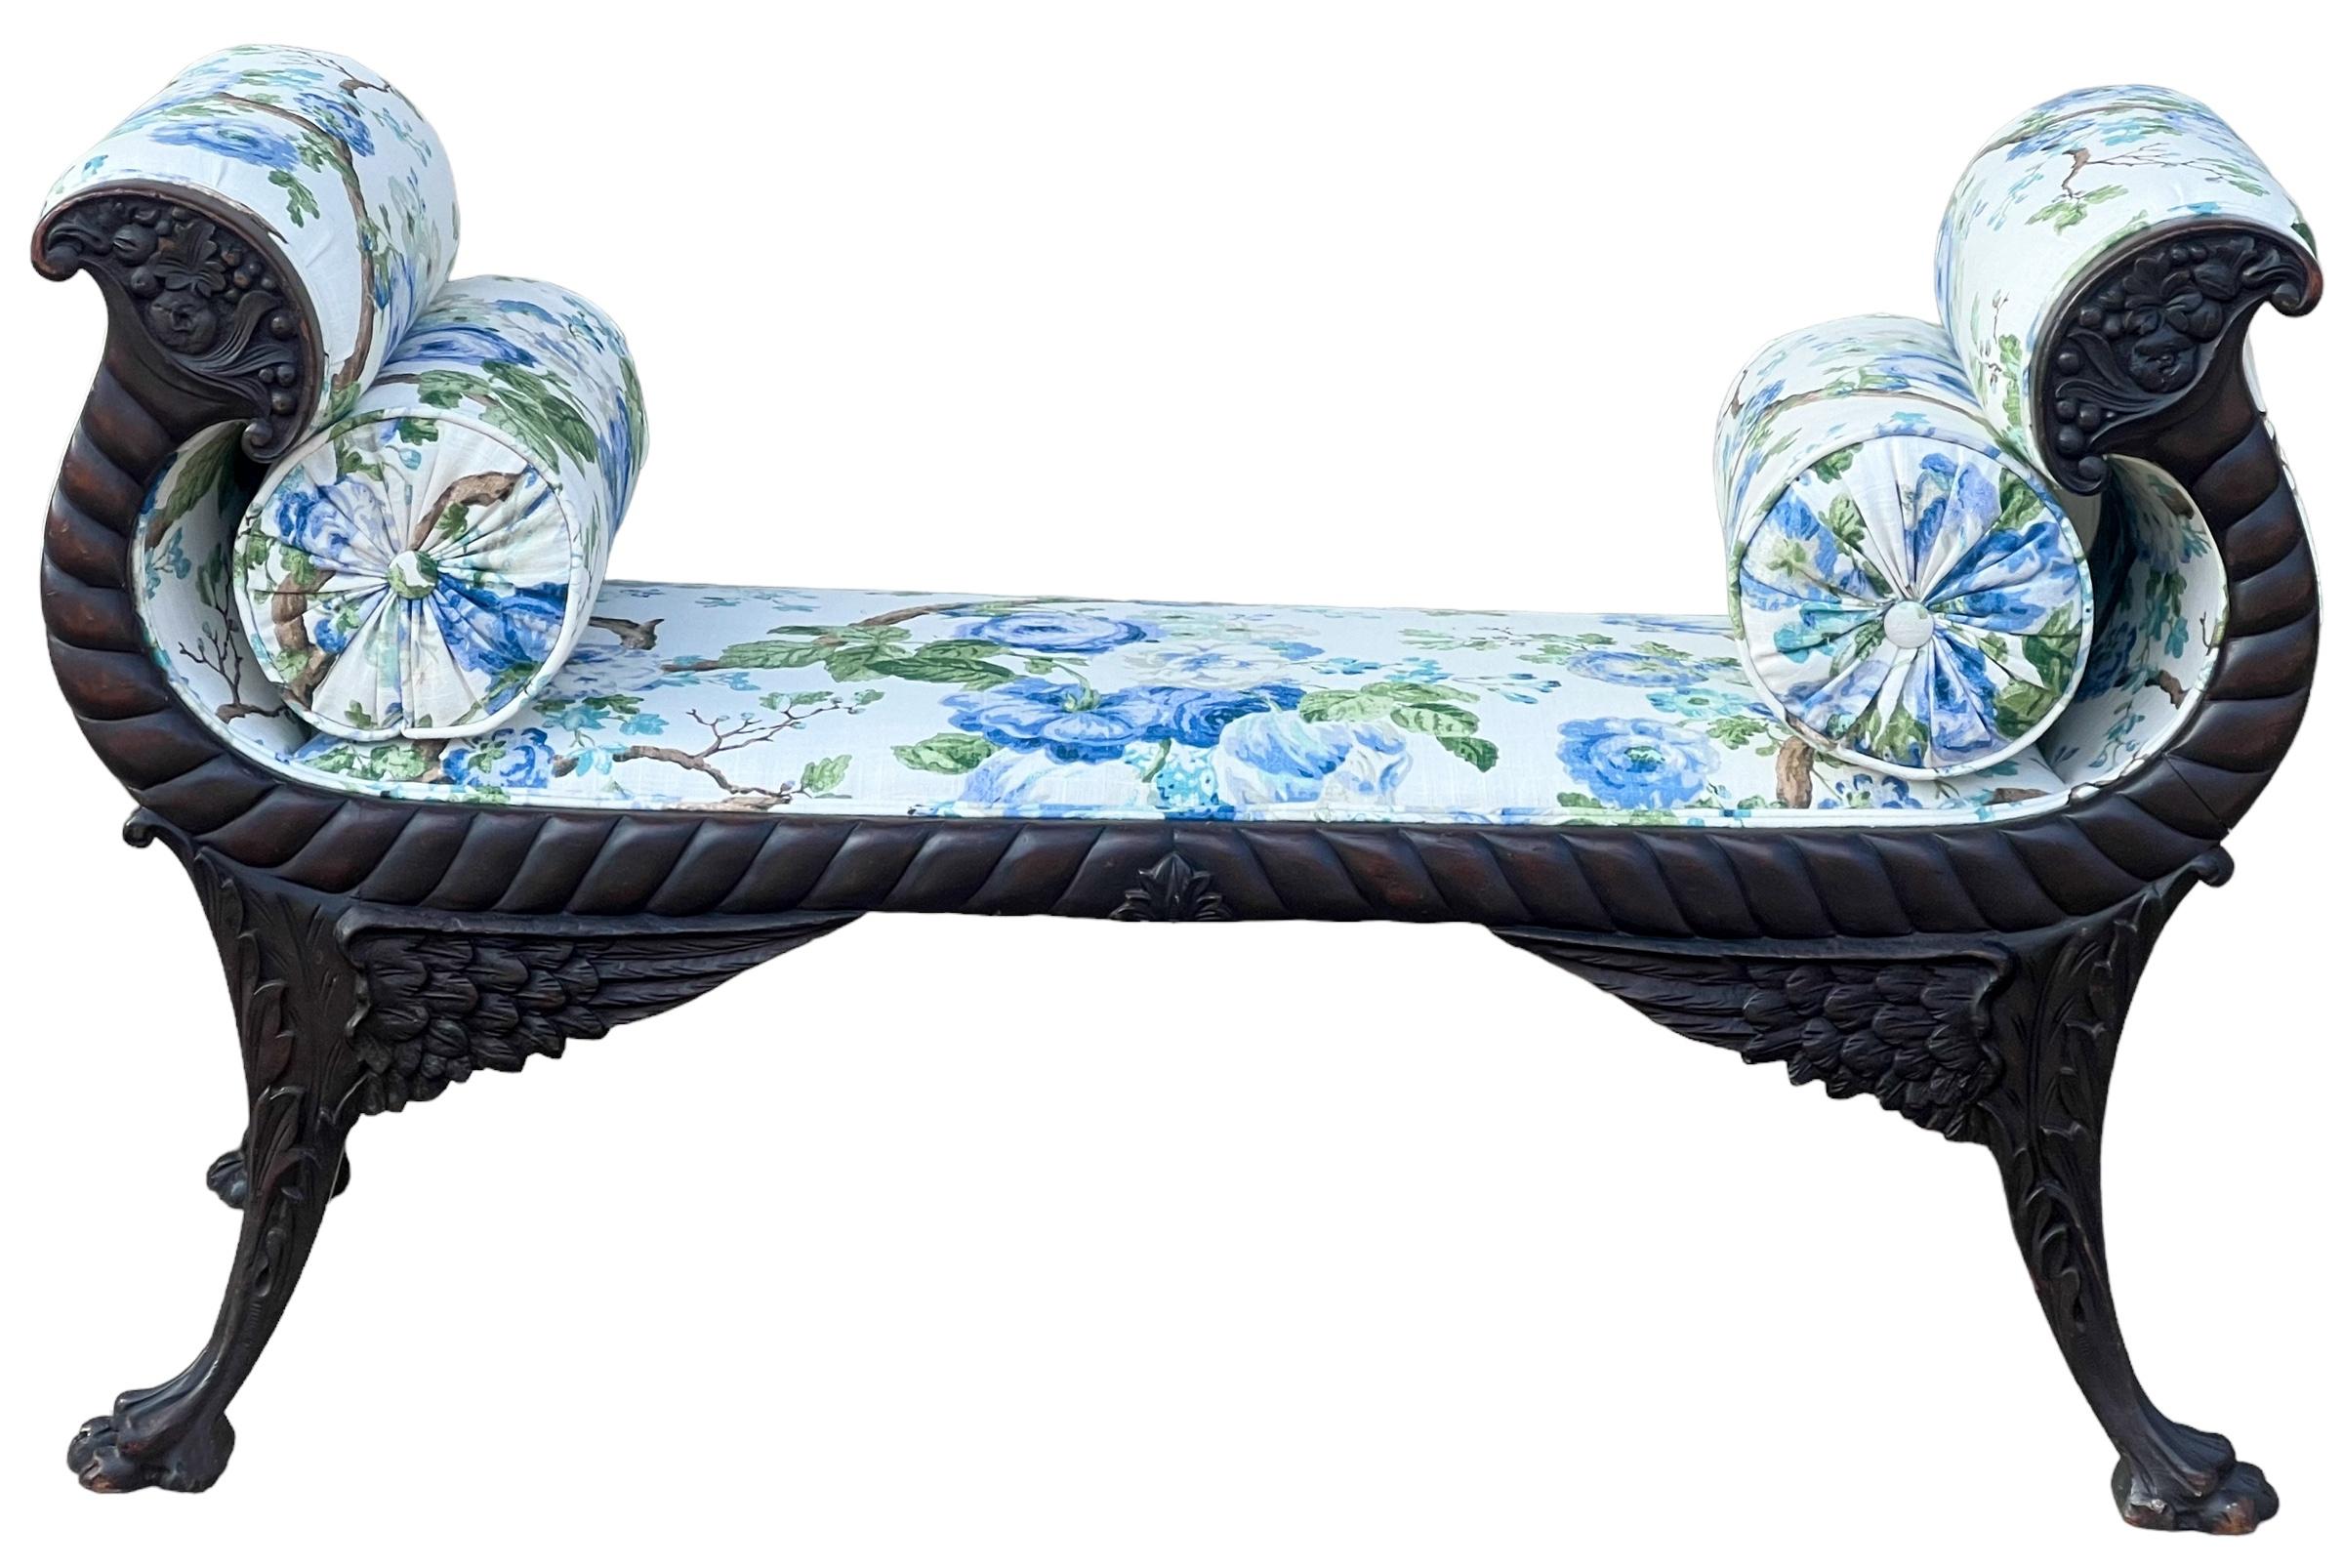 Linen Antique American Empire Carved Mahogany Bench W/ Blue & White Floral Upholstery  For Sale